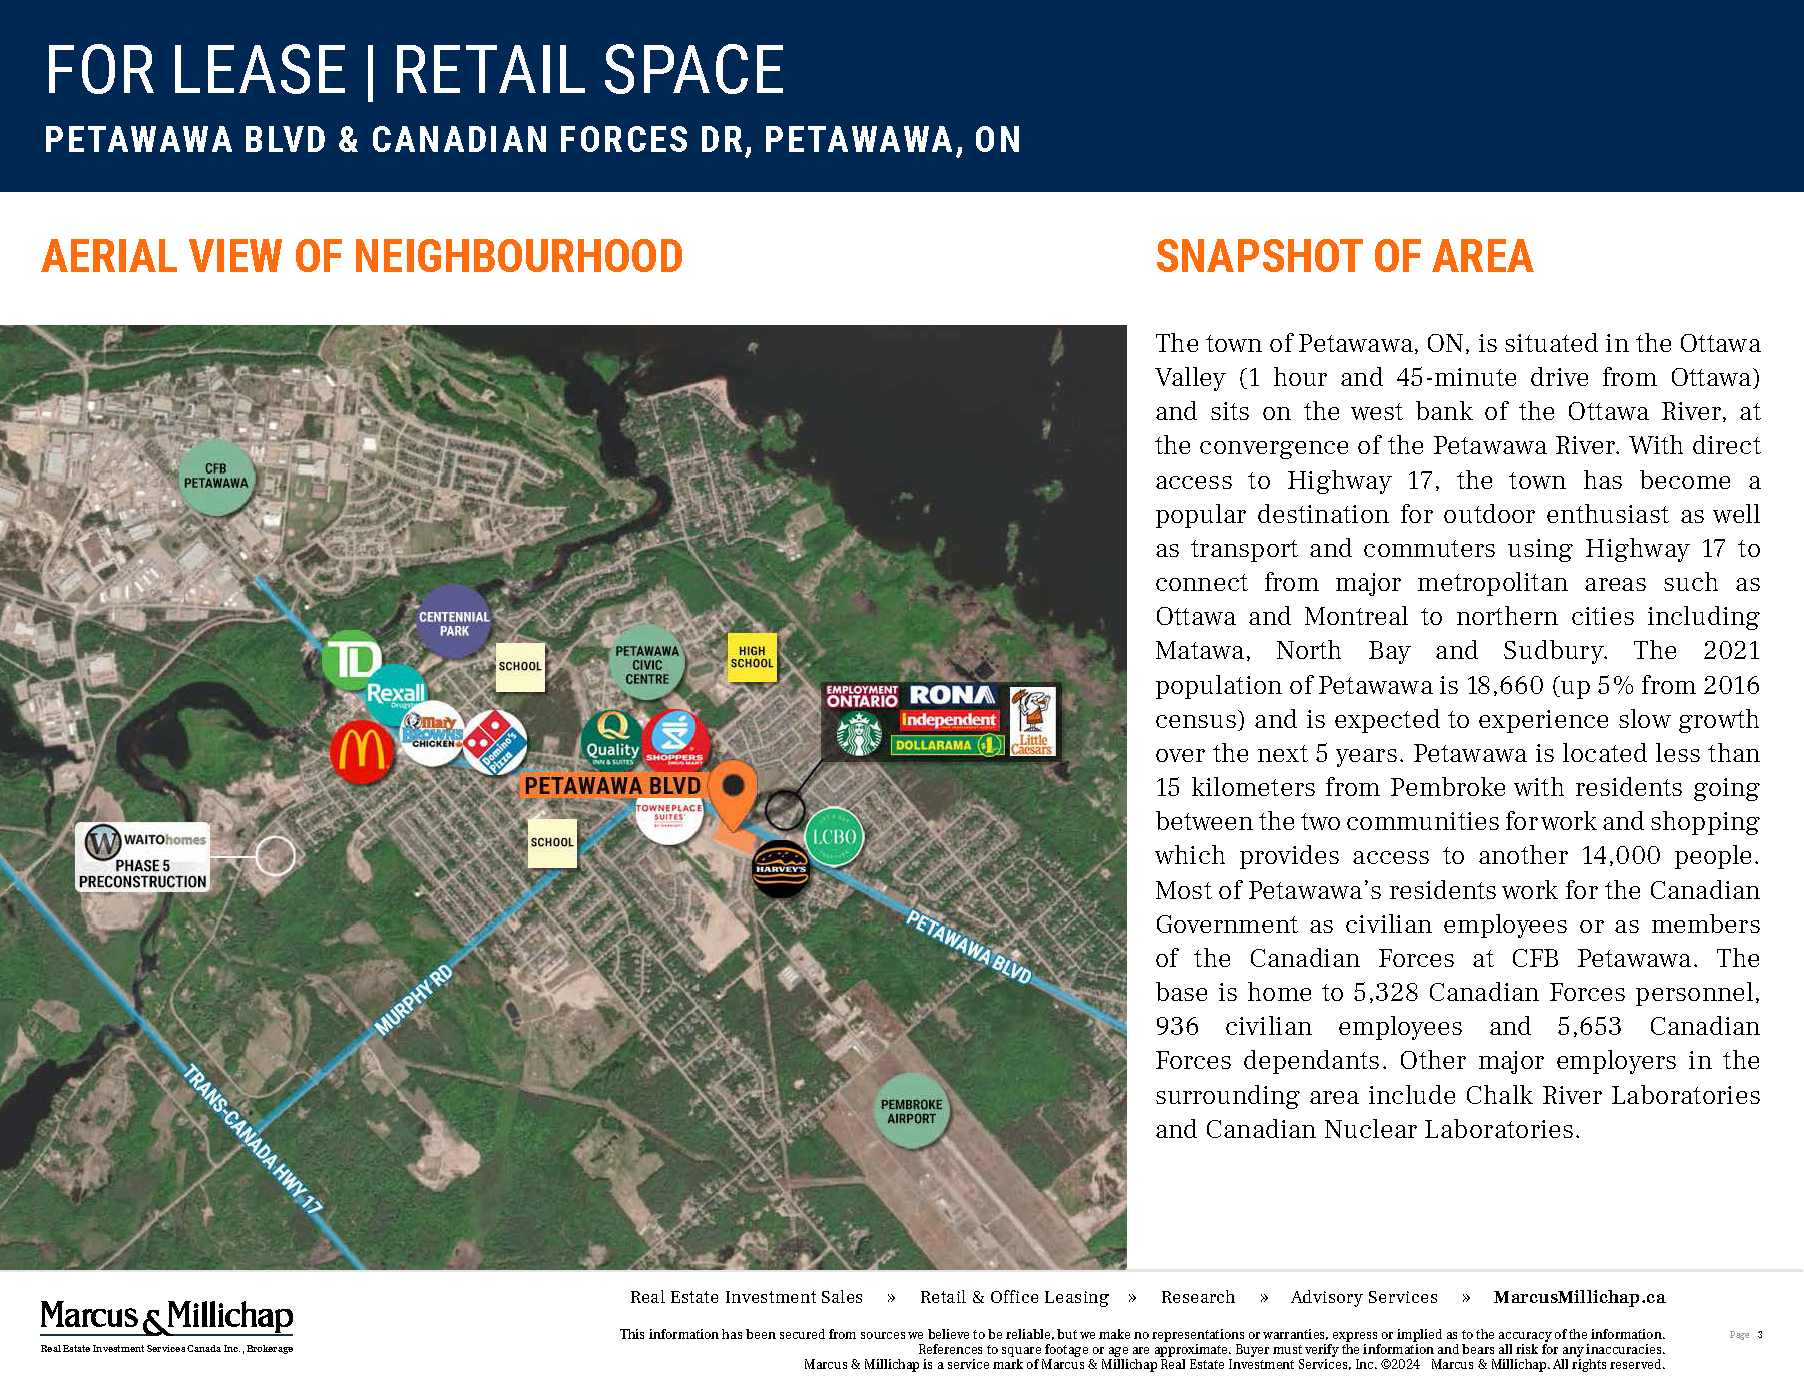 Petawawa Blvd and Canadian Forces Dr. Retail Prospectus page 3